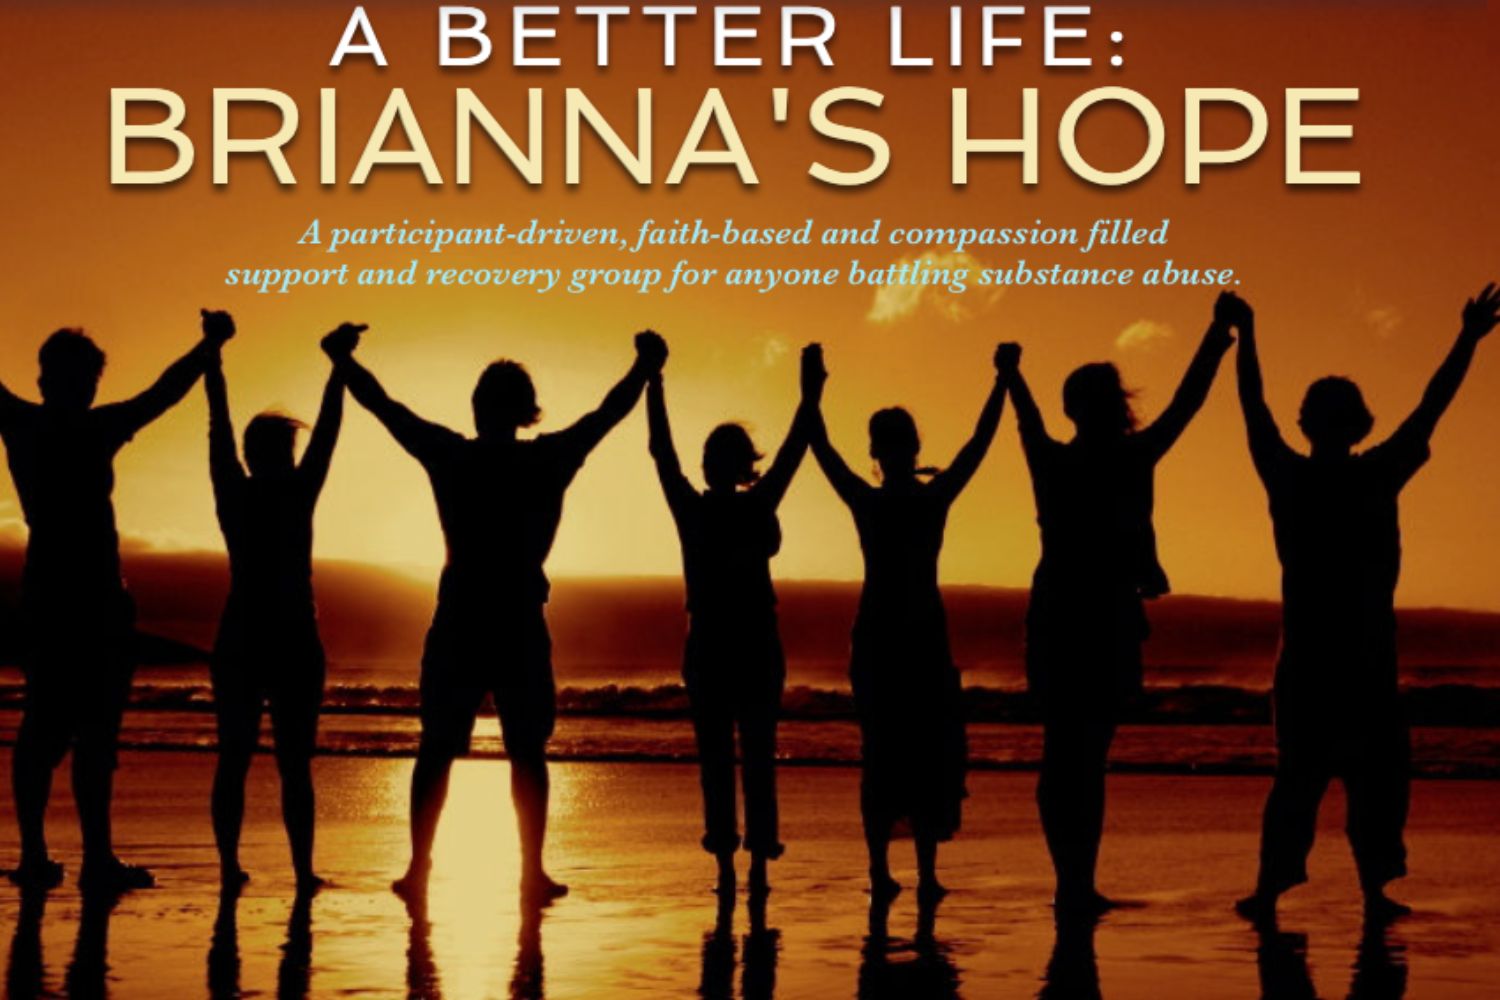 A Better Life - Brianna's Hope